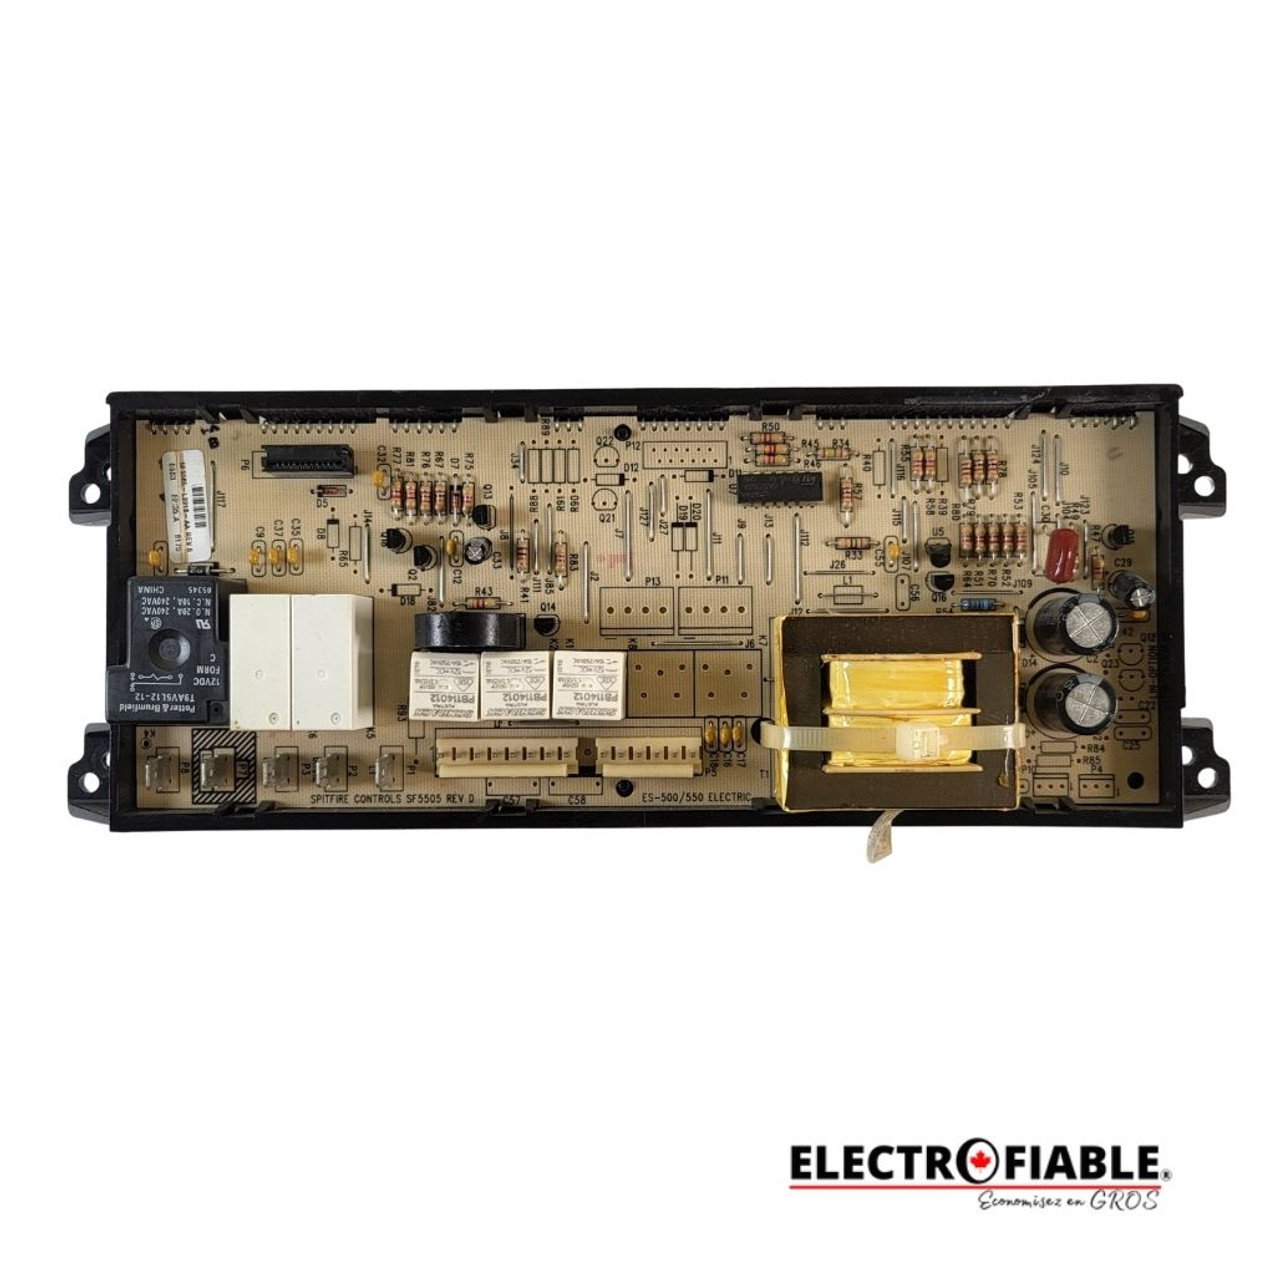 316272210 Control panel for Frigidaire stove